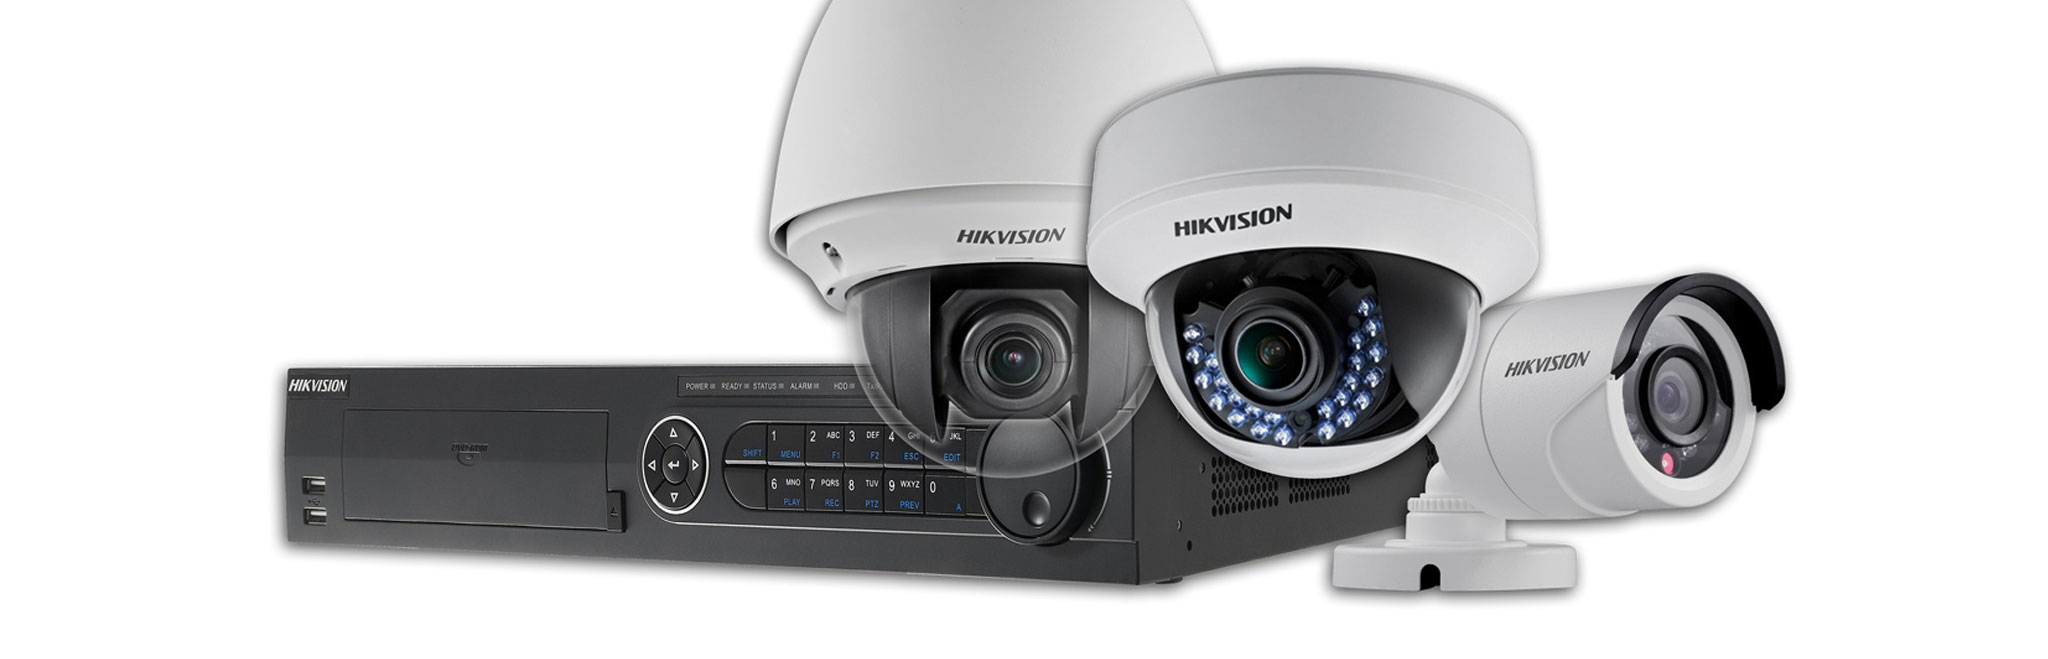 hikvision special camera price in fbd